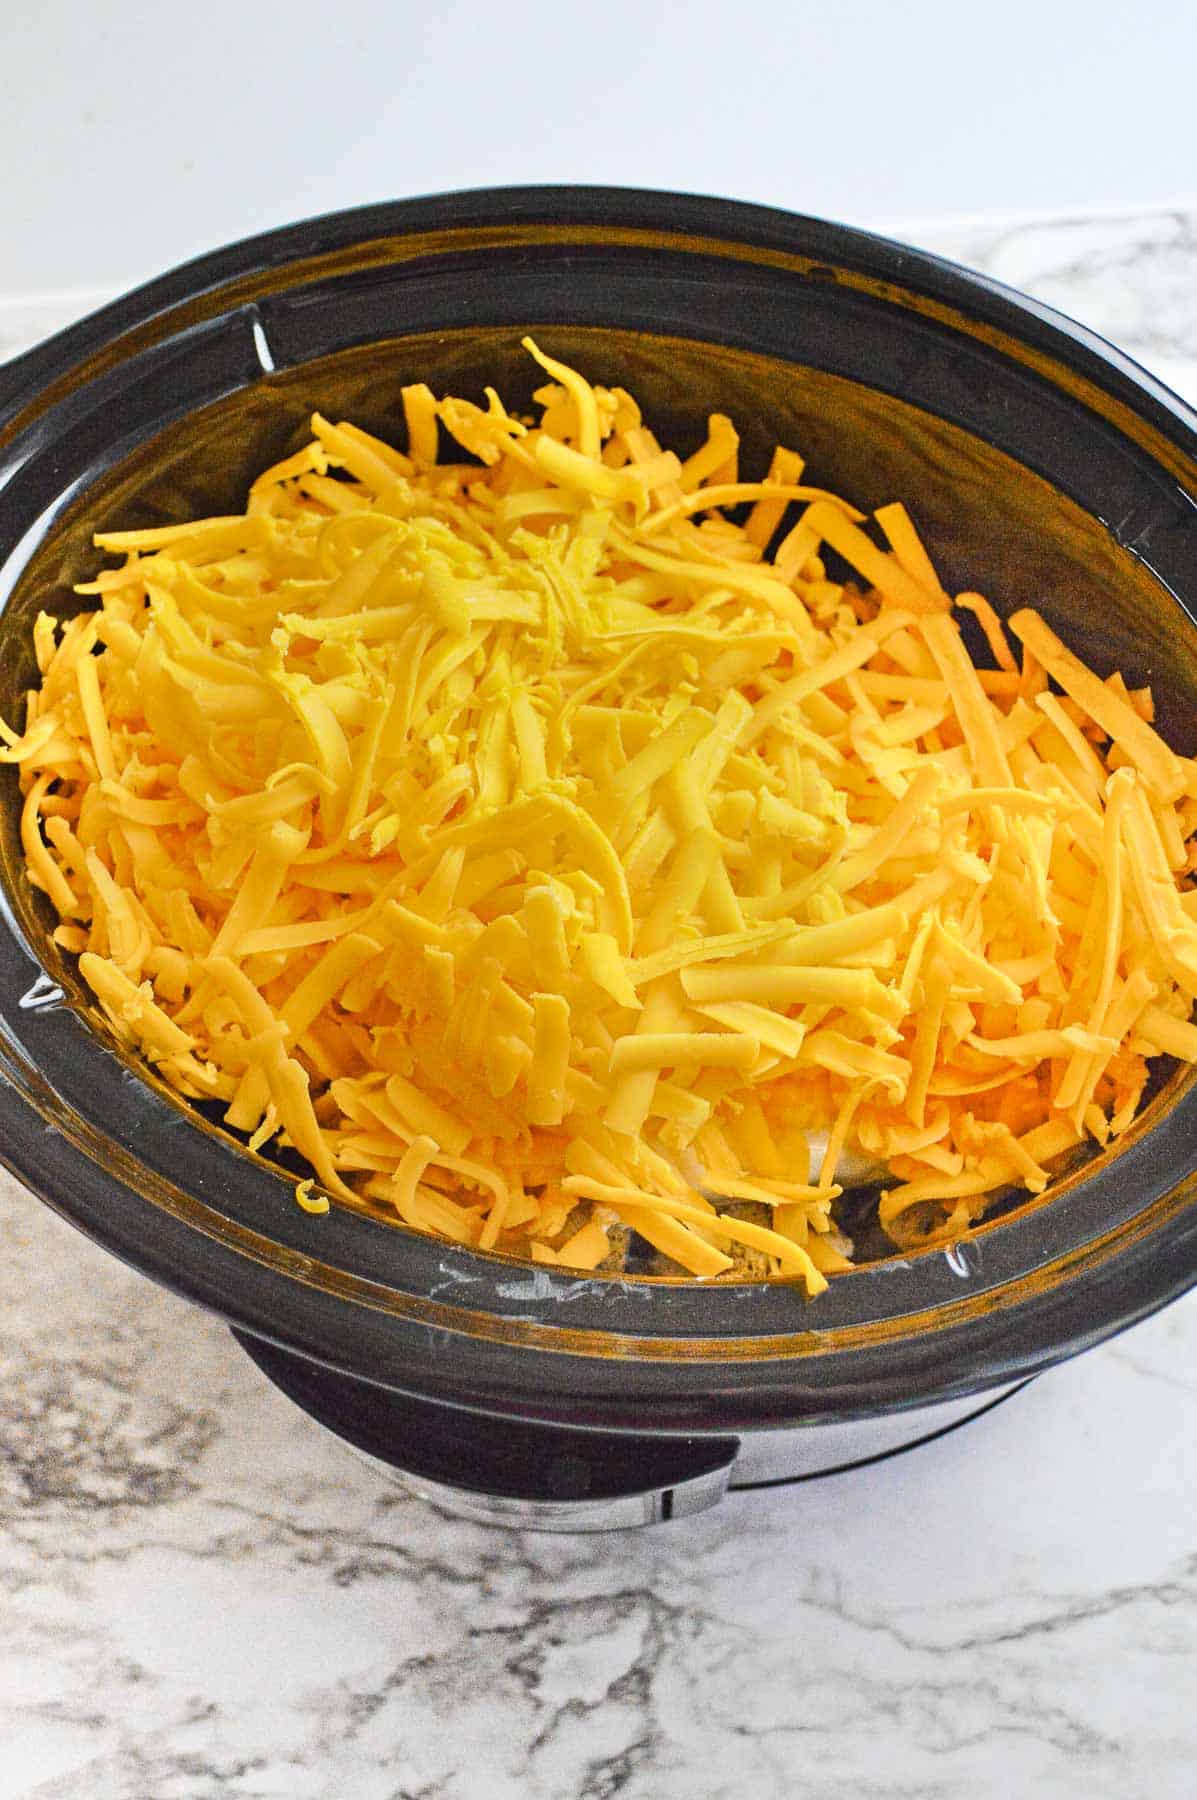 shredded cheese over chicken in a black slow cooker.